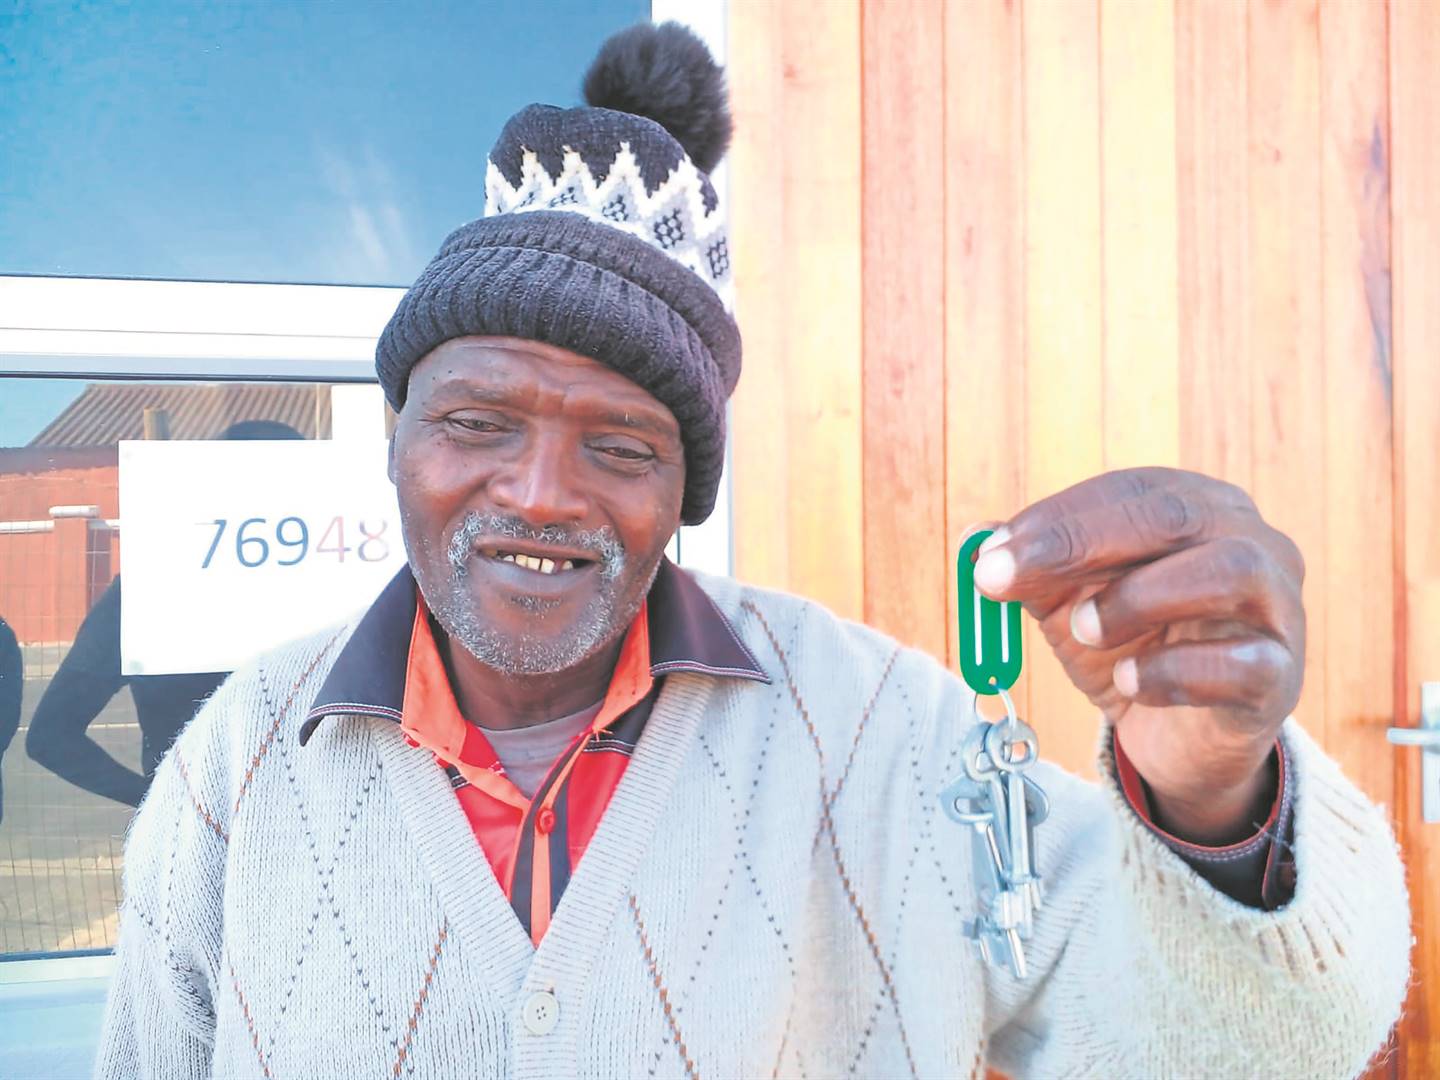 Mkhulu Wilson Jonga, who has been living in a church for years, is happy to finally move into his new house.   Photos by     Lulekwa Mbadamane